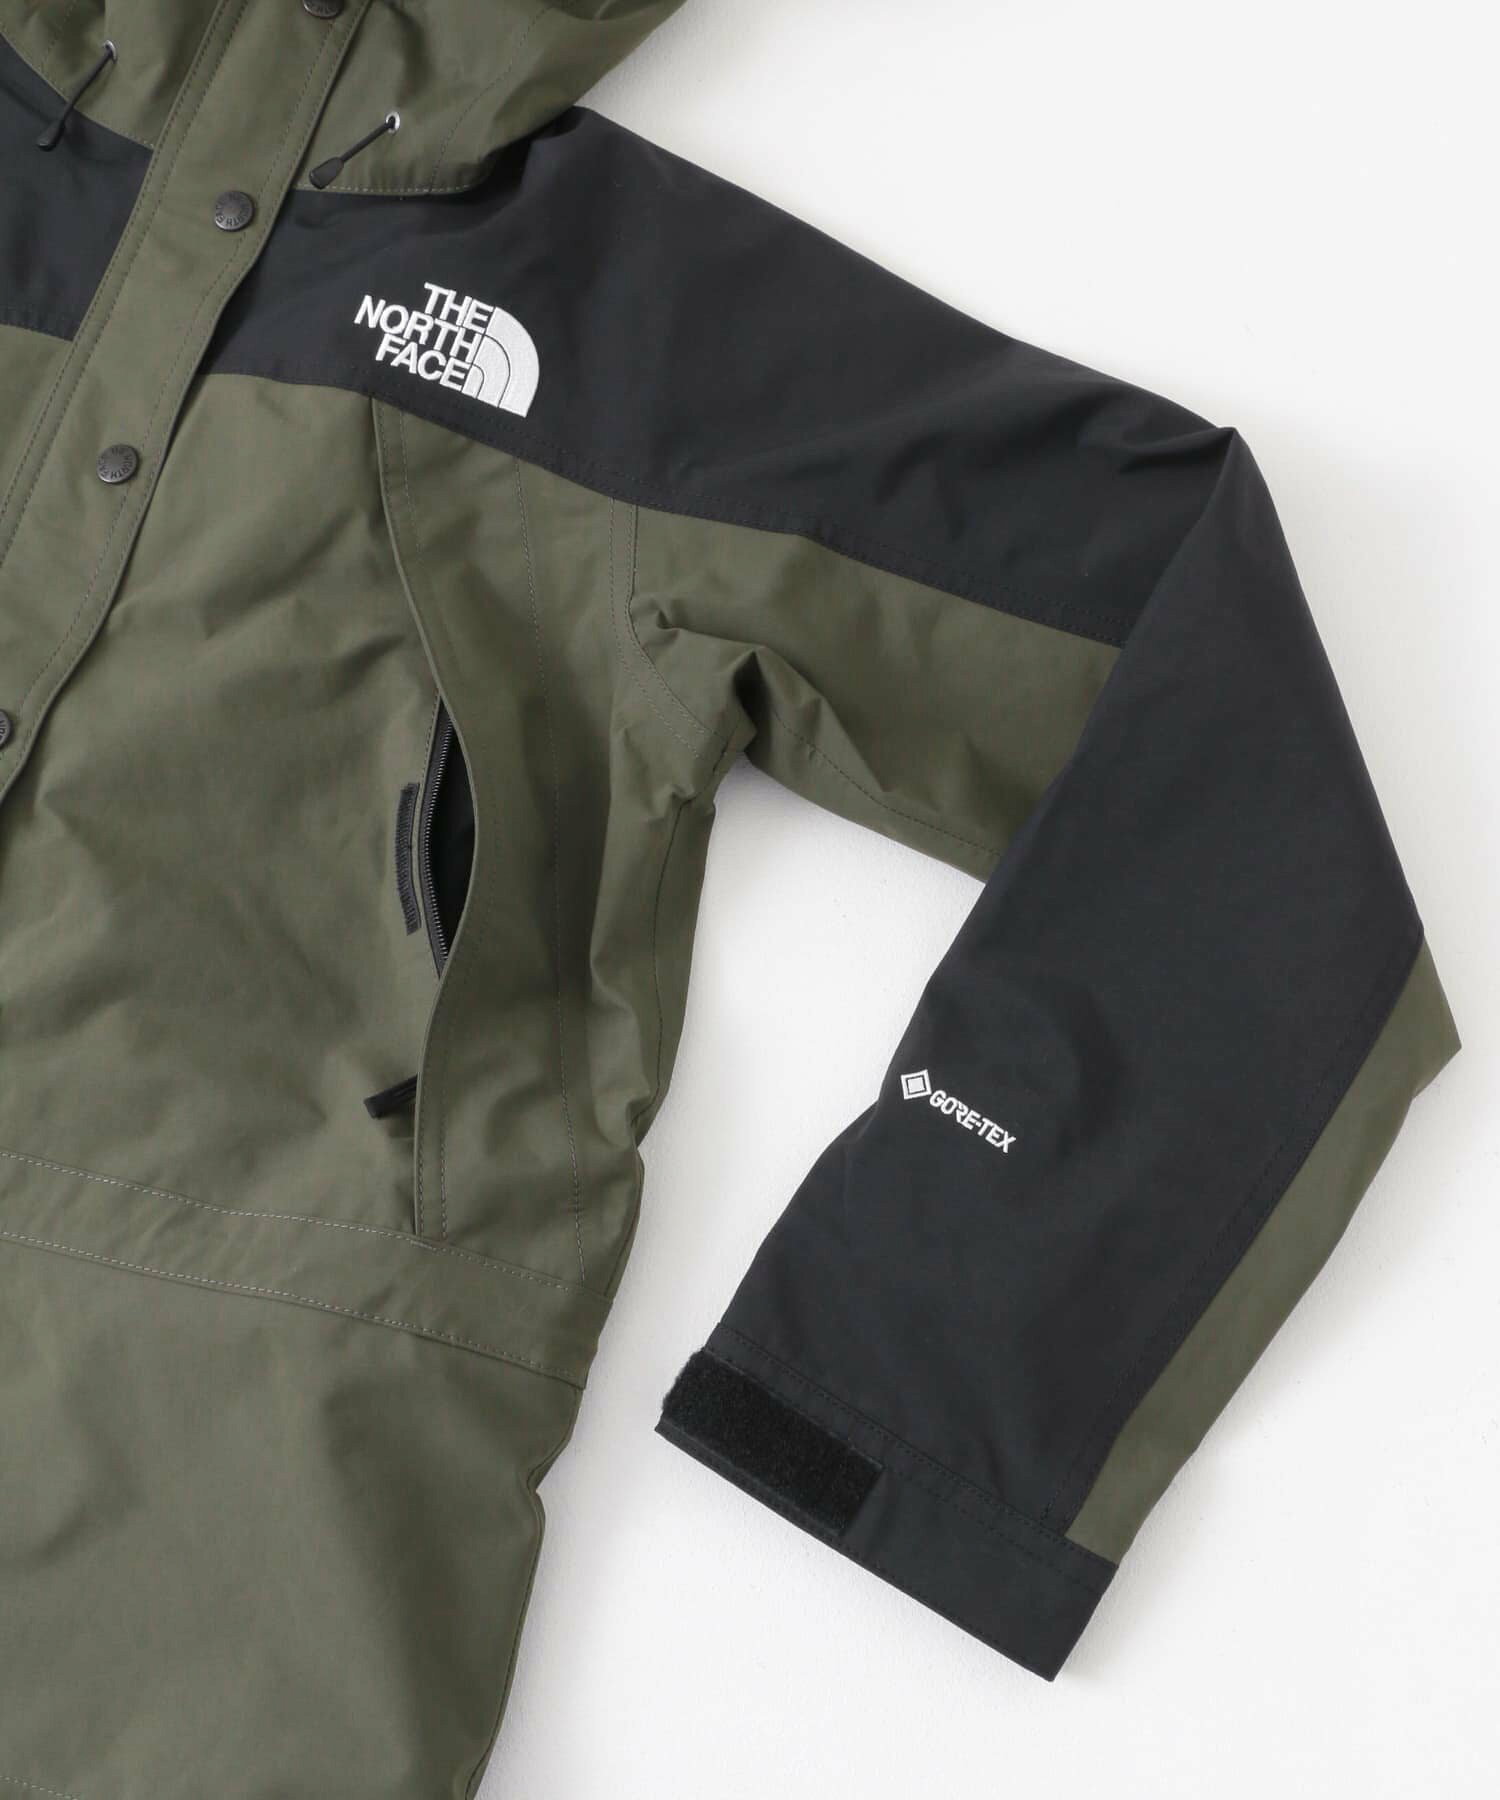 THE NORTH FACE MOUNTAIN LIGHT JACKET